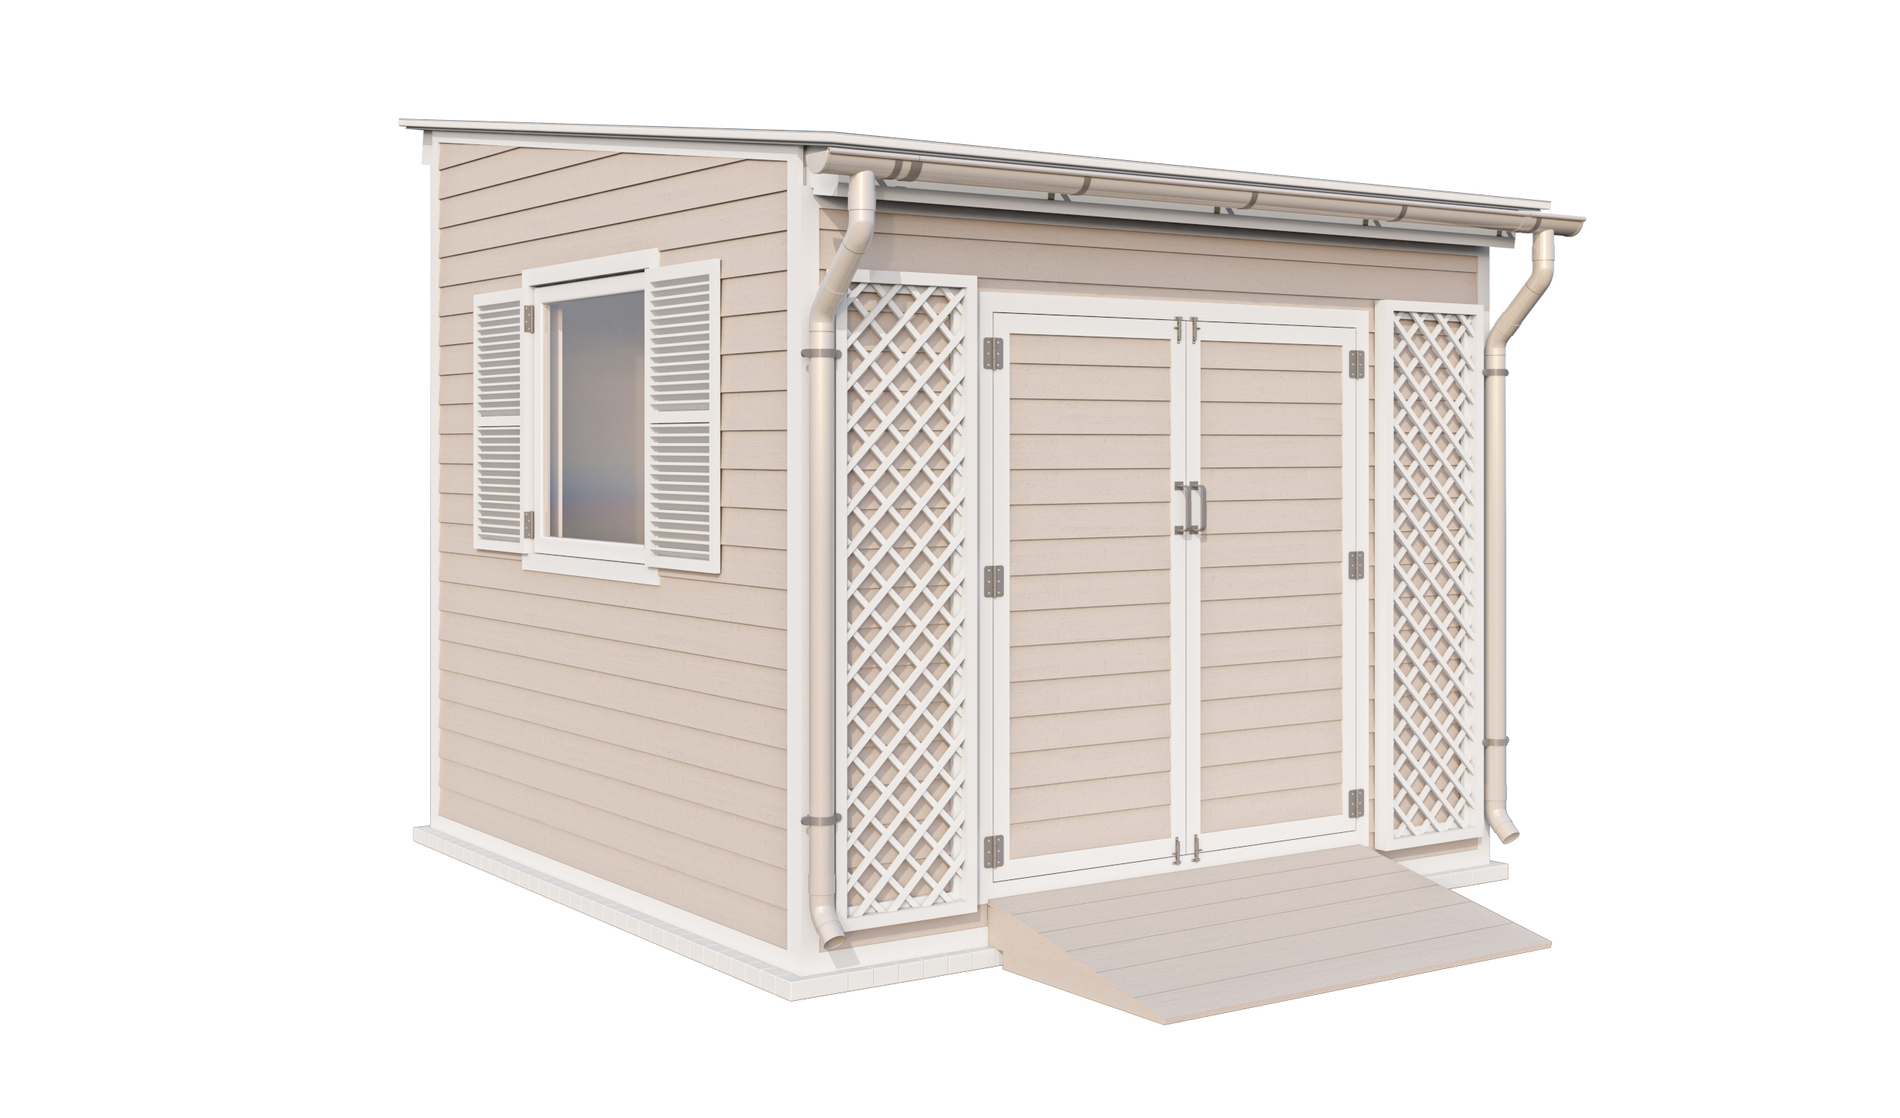 10x10 lean to garden shed